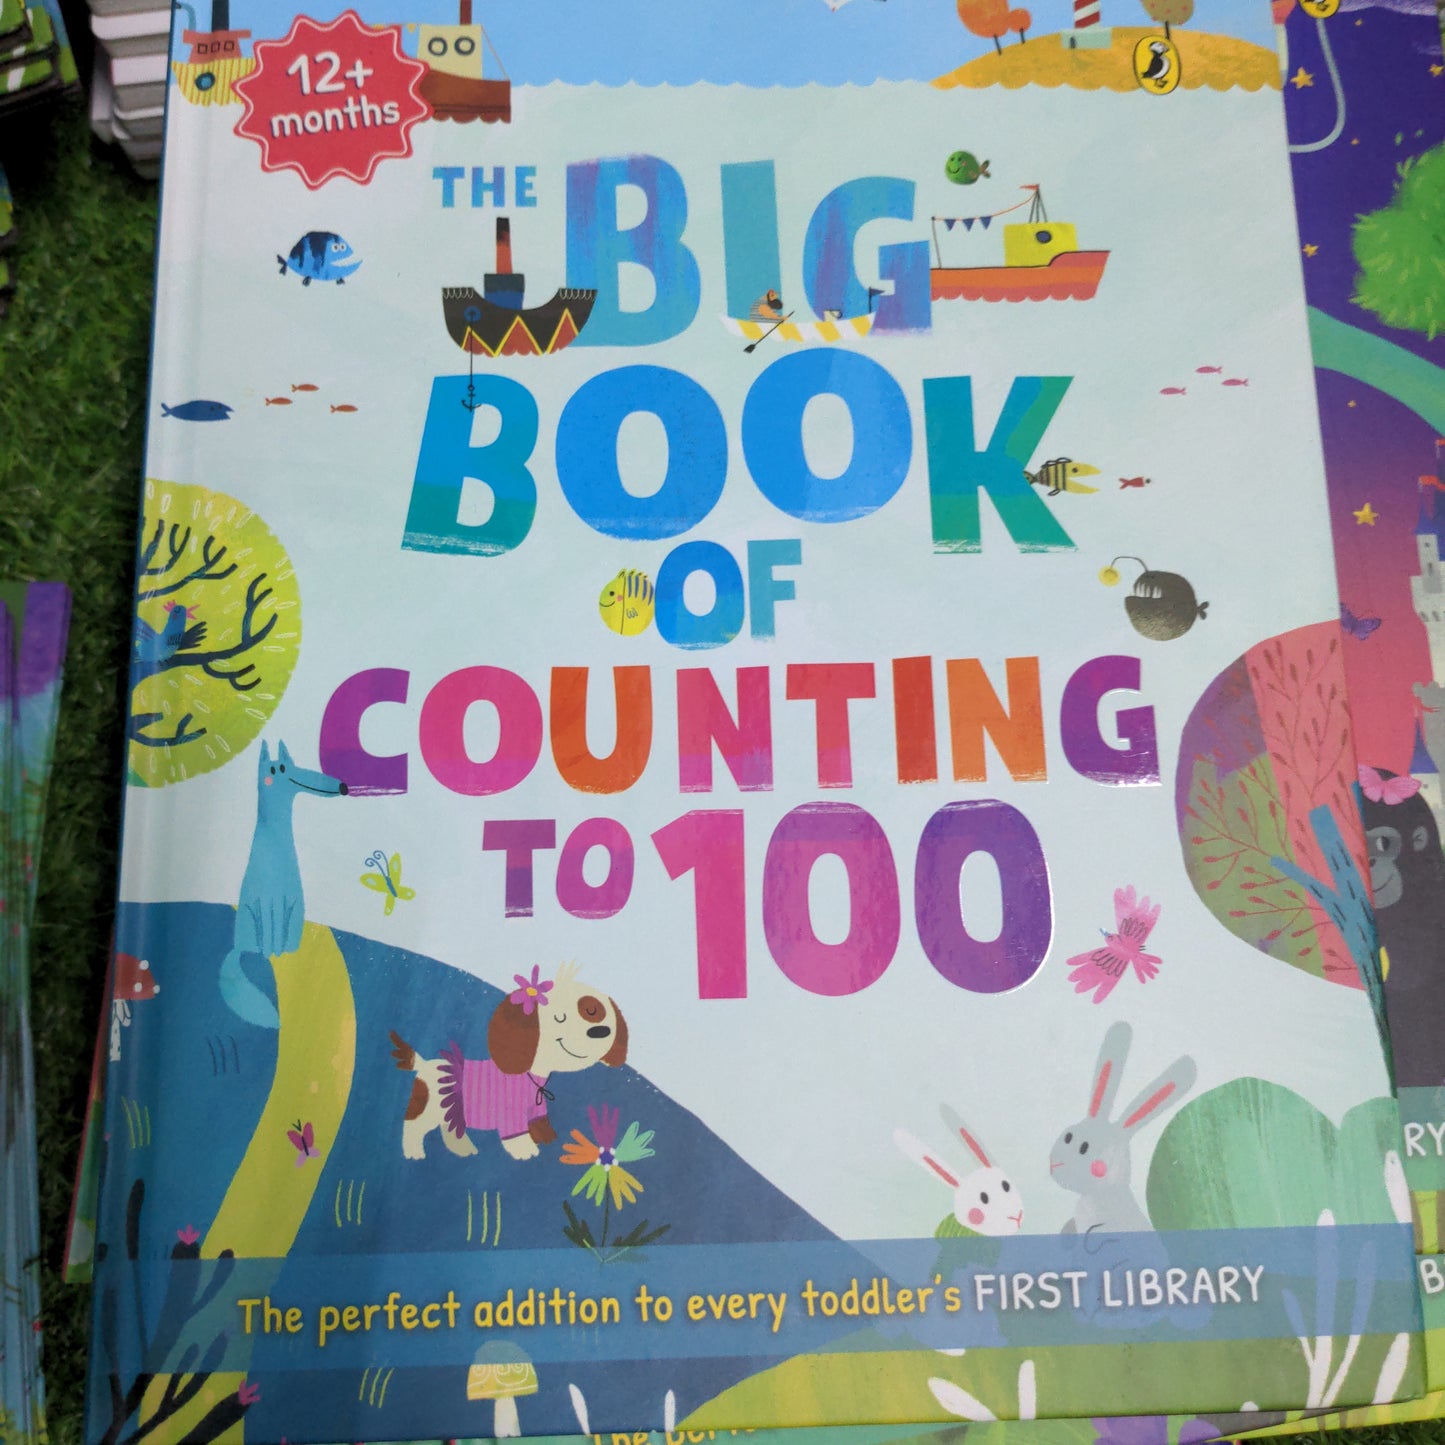 The Big Book of Counting To 100